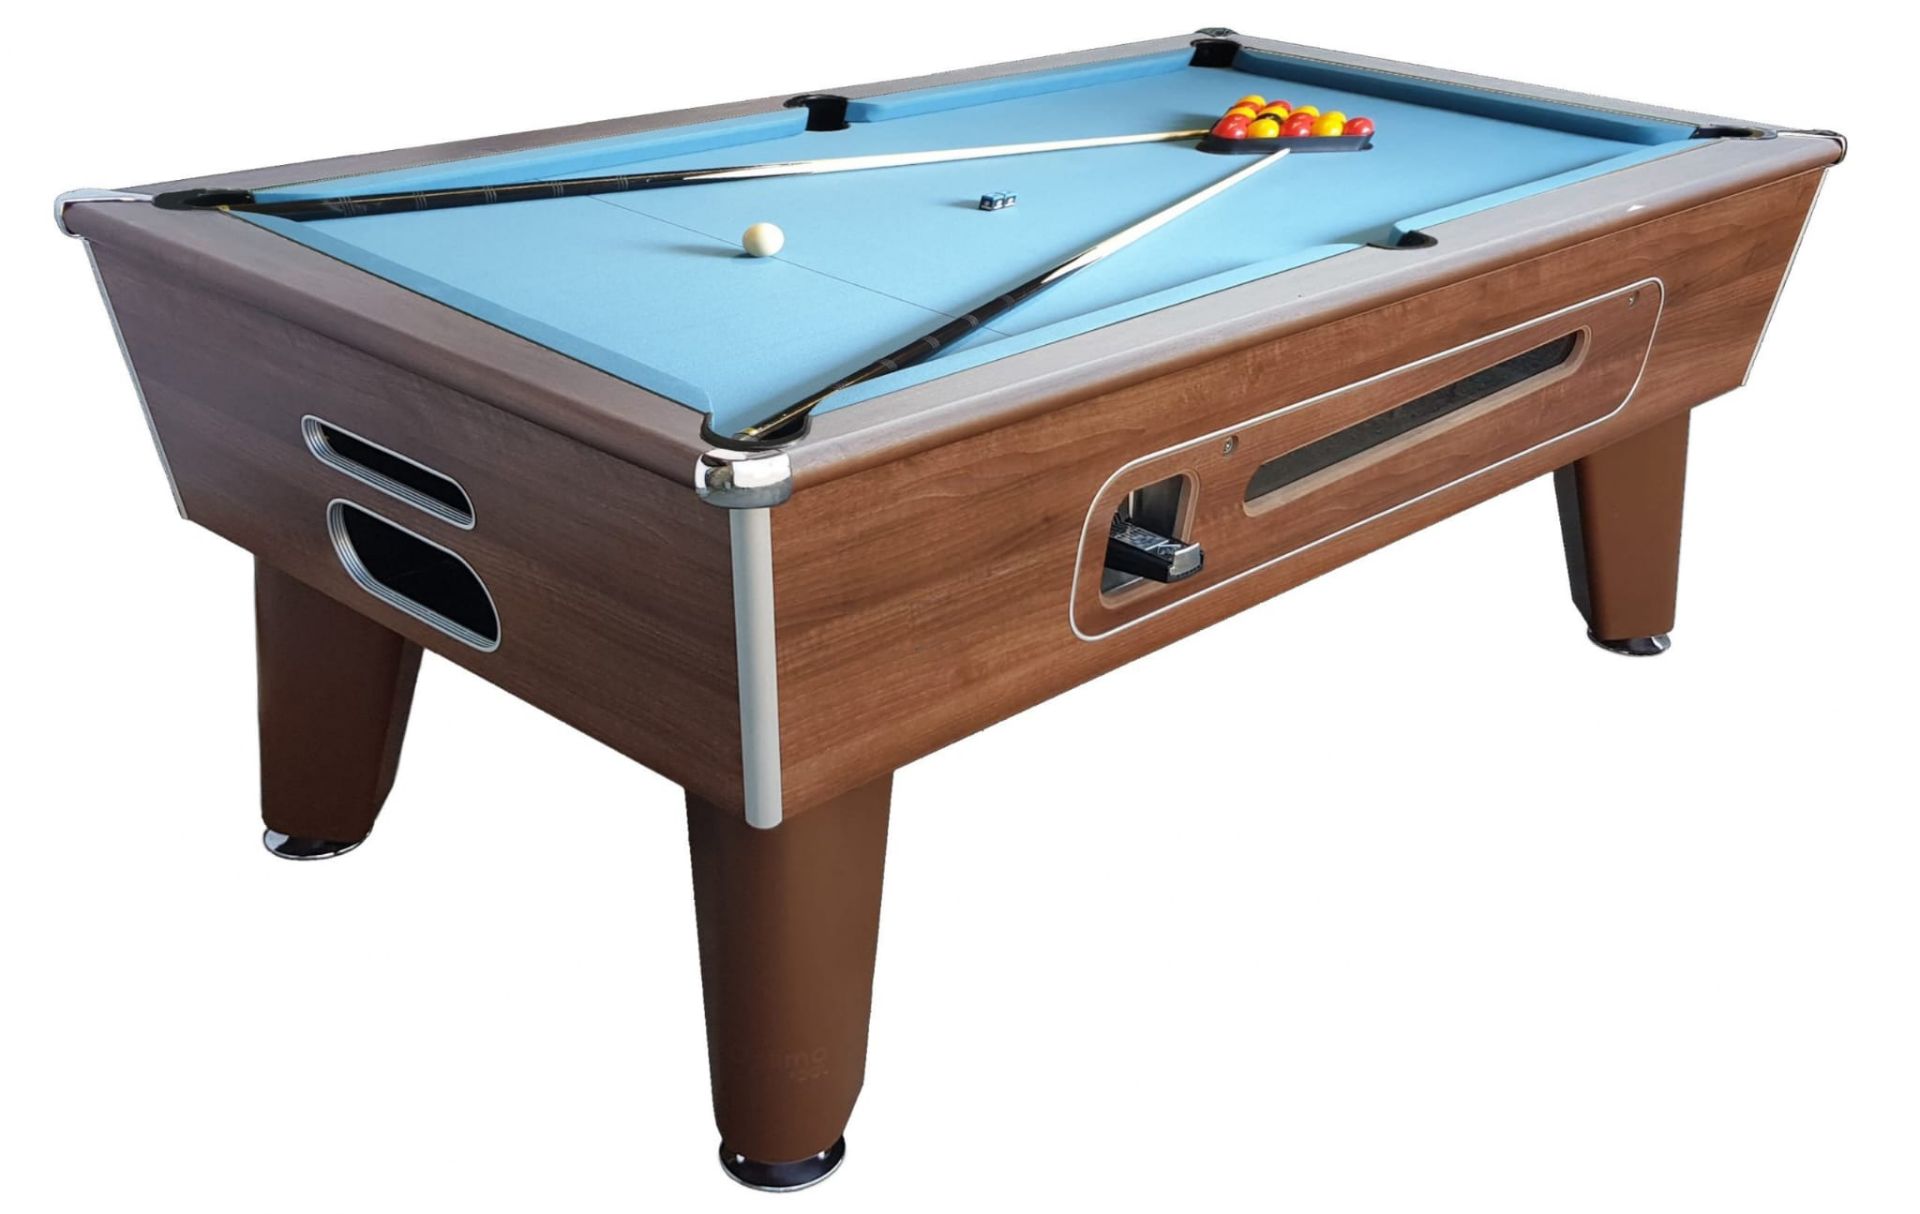 NEW POOL TABLE BARLINE TABLE 7X4 COIN OPERATED AND FREE PLAY